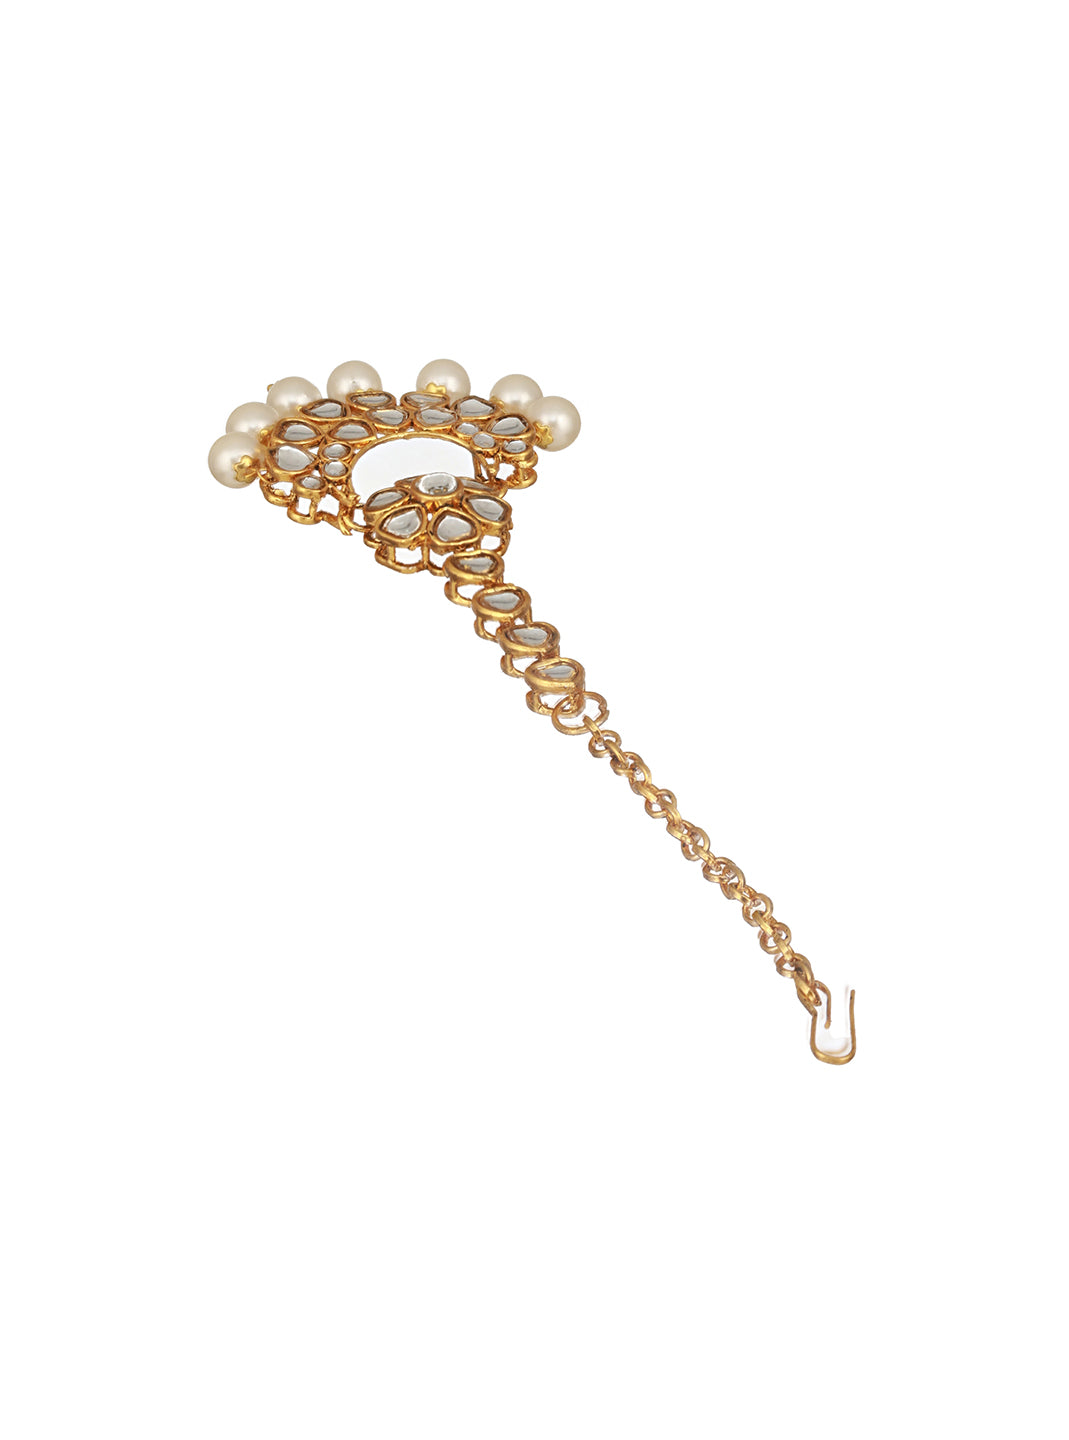 Jazz And Sizzle Gold-Plated & Off-White Artificial Stone-Studded Beaded Maang Tikka - Jazzandsizzle